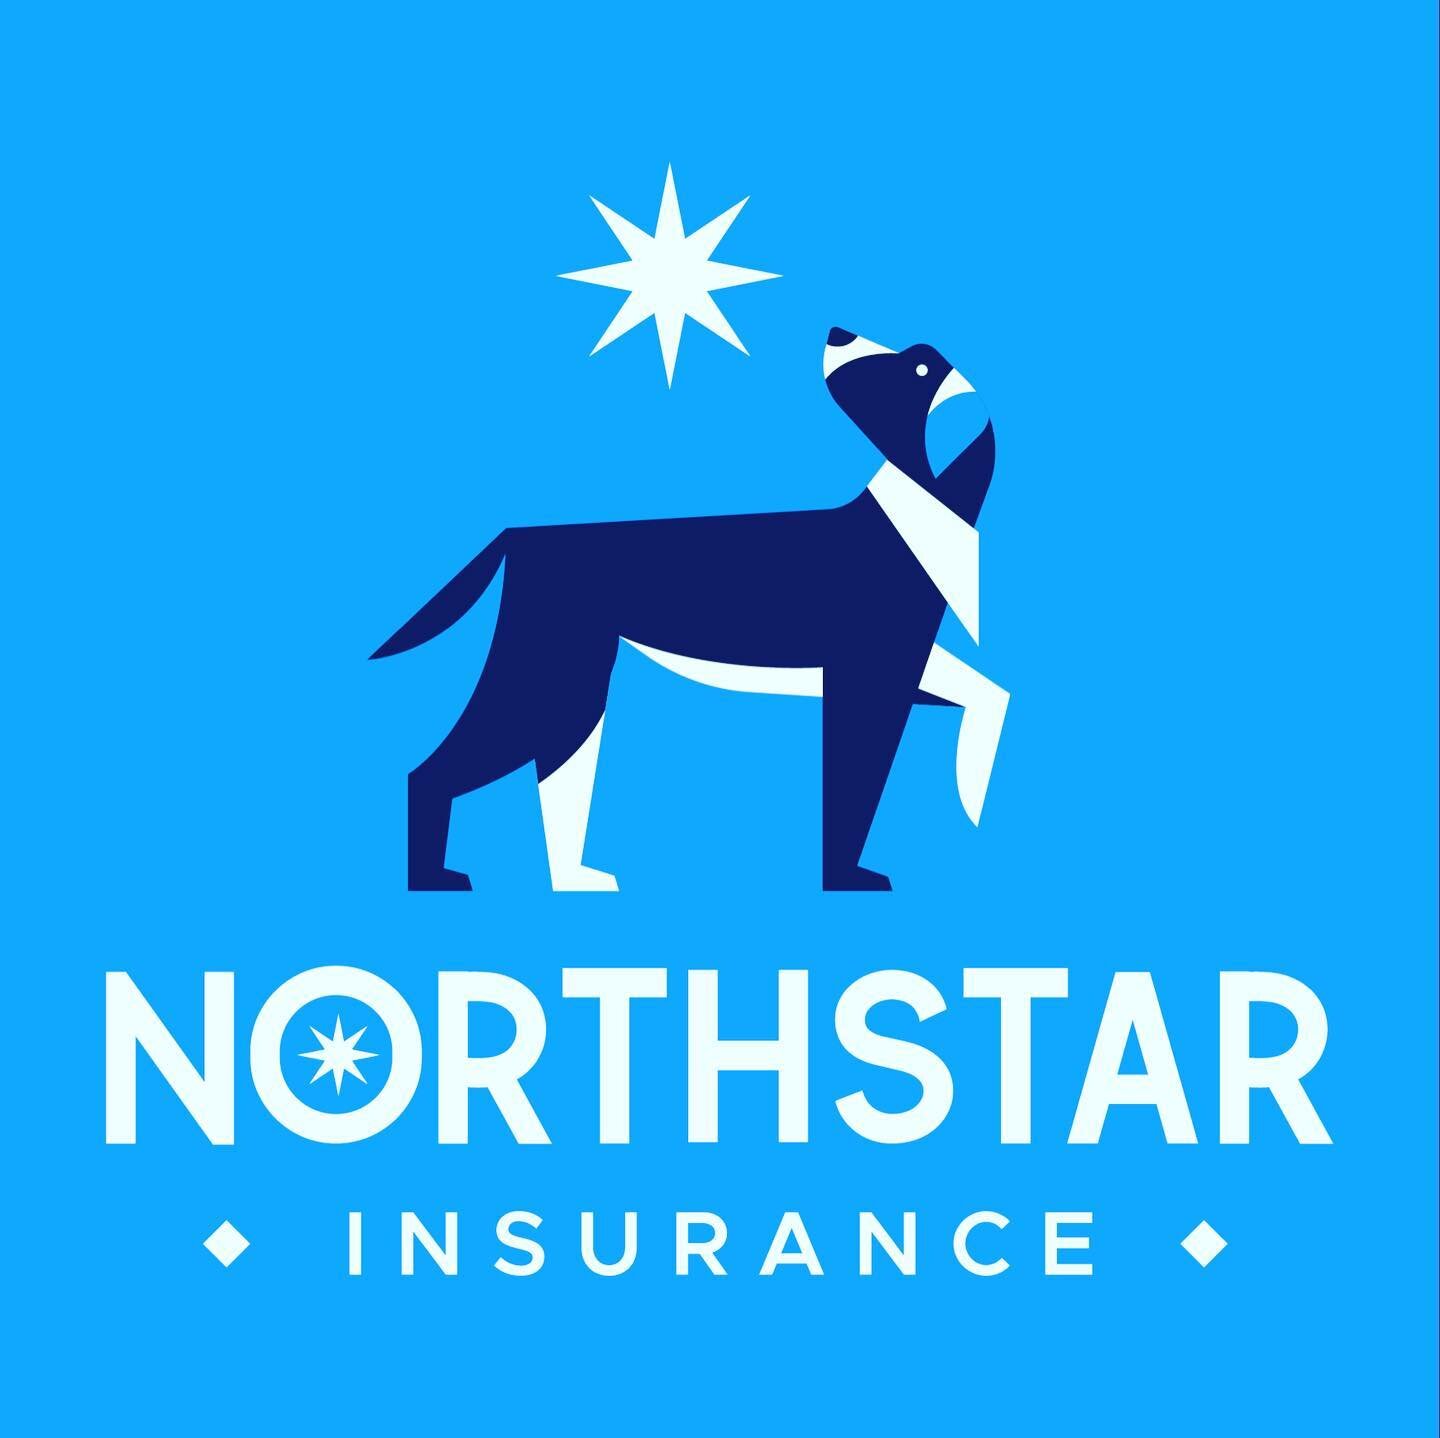 DID YOU KNOW THAT NORTH STAR IS TEXTING NOW?
 
Same Number:
(888)664-3126

Have Questions? Text us

Need to reschedule? Text us

Can&rsquo;t get in touch with your account manager? Text us 

Need documents quickly? Text us

Need to endorse a policy o